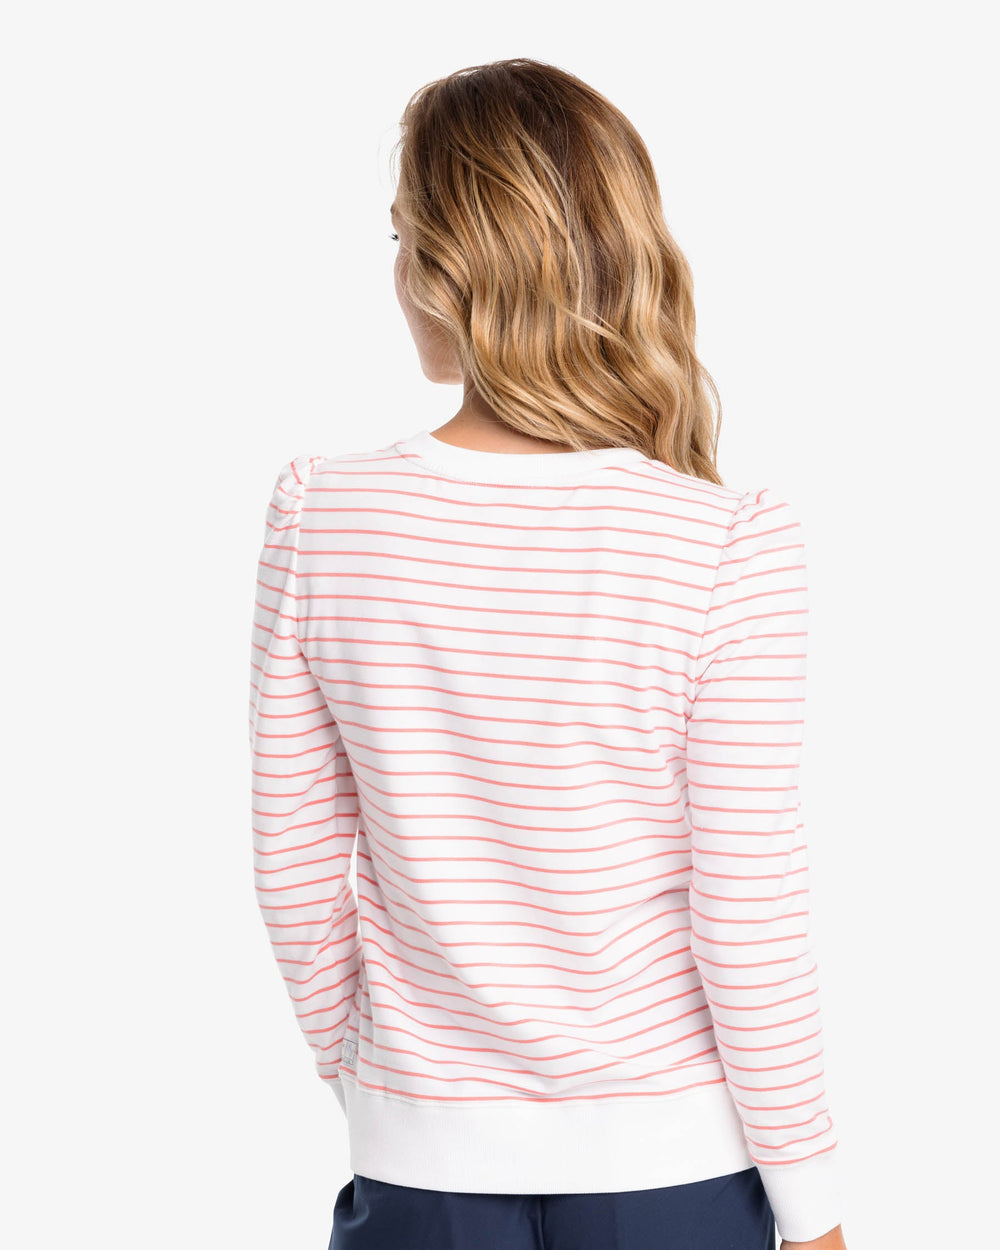 The back view of the Jayne Striped Terry Sweatshirt by Southern Tide - Classic White